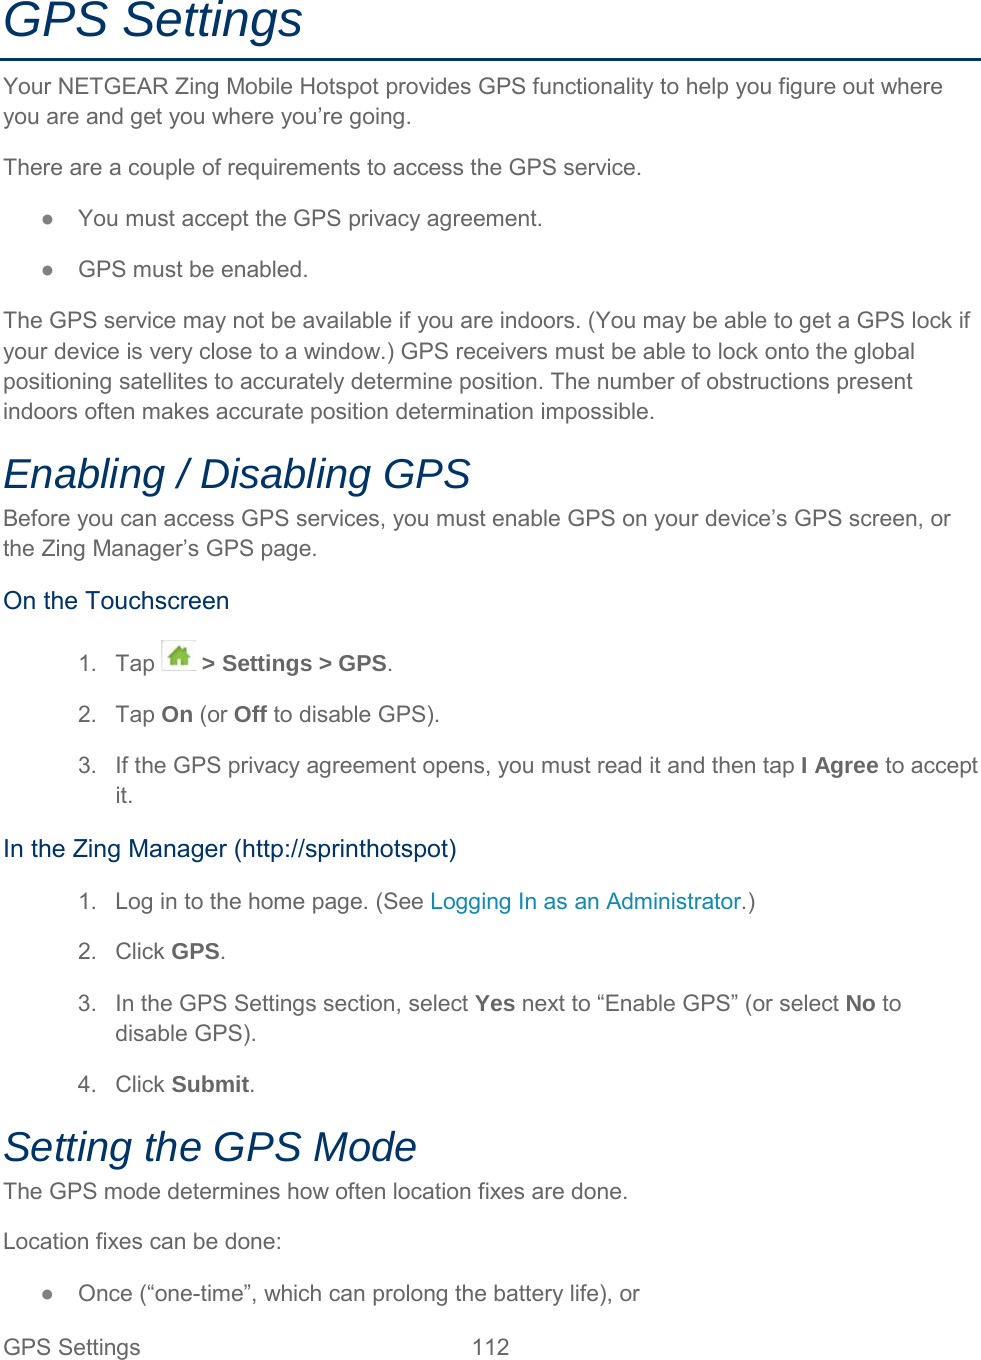 GPS Settings Your NETGEAR Zing Mobile Hotspot provides GPS functionality to help you figure out where you are and get you where you’re going.  There are a couple of requirements to access the GPS service. ●  You must accept the GPS privacy agreement. ●  GPS must be enabled. The GPS service may not be available if you are indoors. (You may be able to get a GPS lock if your device is very close to a window.) GPS receivers must be able to lock onto the global positioning satellites to accurately determine position. The number of obstructions present indoors often makes accurate position determination impossible. Enabling / Disabling GPS Before you can access GPS services, you must enable GPS on your device’s GPS screen, or the Zing Manager’s GPS page. On the Touchscreen 1. Tap  &gt; Settings &gt; GPS. 2. Tap On (or Off to disable GPS). 3. If the GPS privacy agreement opens, you must read it and then tap I Agree to accept it. In the Zing Manager (http://sprinthotspot) 1. Log in to the home page. (See Logging In as an Administrator.) 2. Click GPS. 3. In the GPS Settings section, select Yes next to “Enable GPS” (or select No to disable GPS). 4. Click Submit. Setting the GPS Mode The GPS mode determines how often location fixes are done. Location fixes can be done: ●  Once (“one-time”, which can prolong the battery life), or GPS Settings 112   